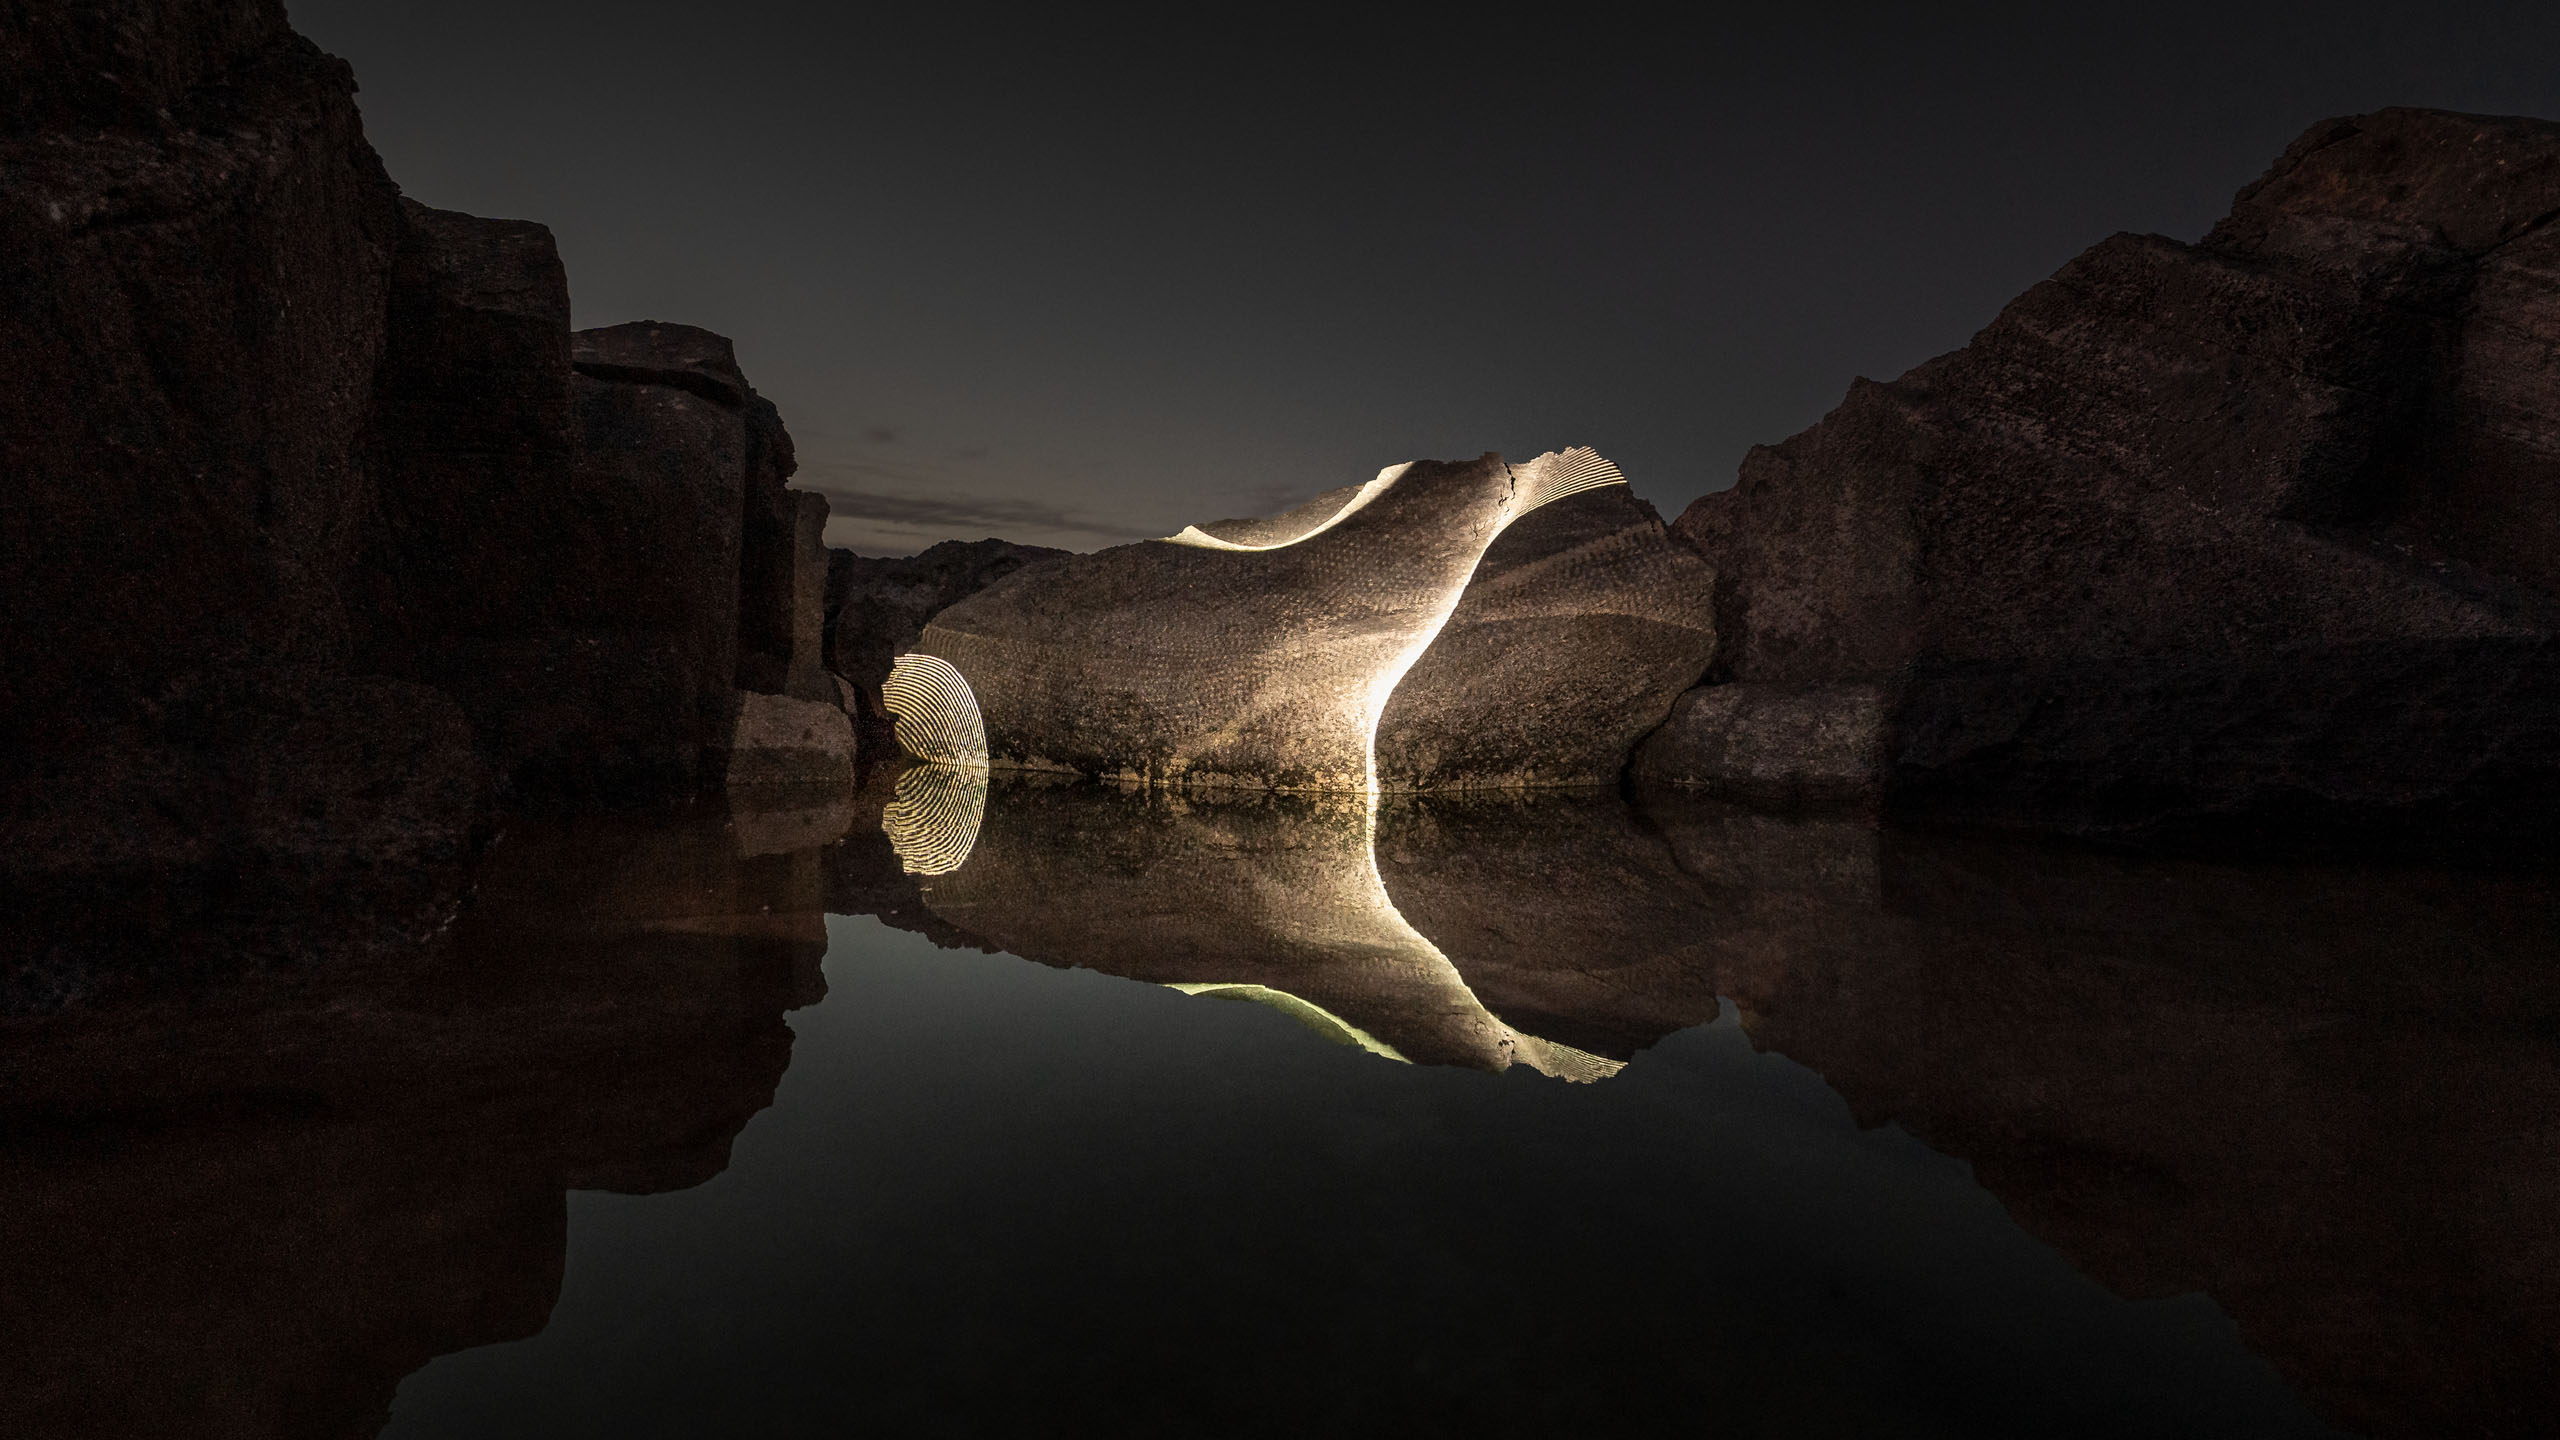 Video-mapping projections in nature on a beautiful boulder mirrored in calm water